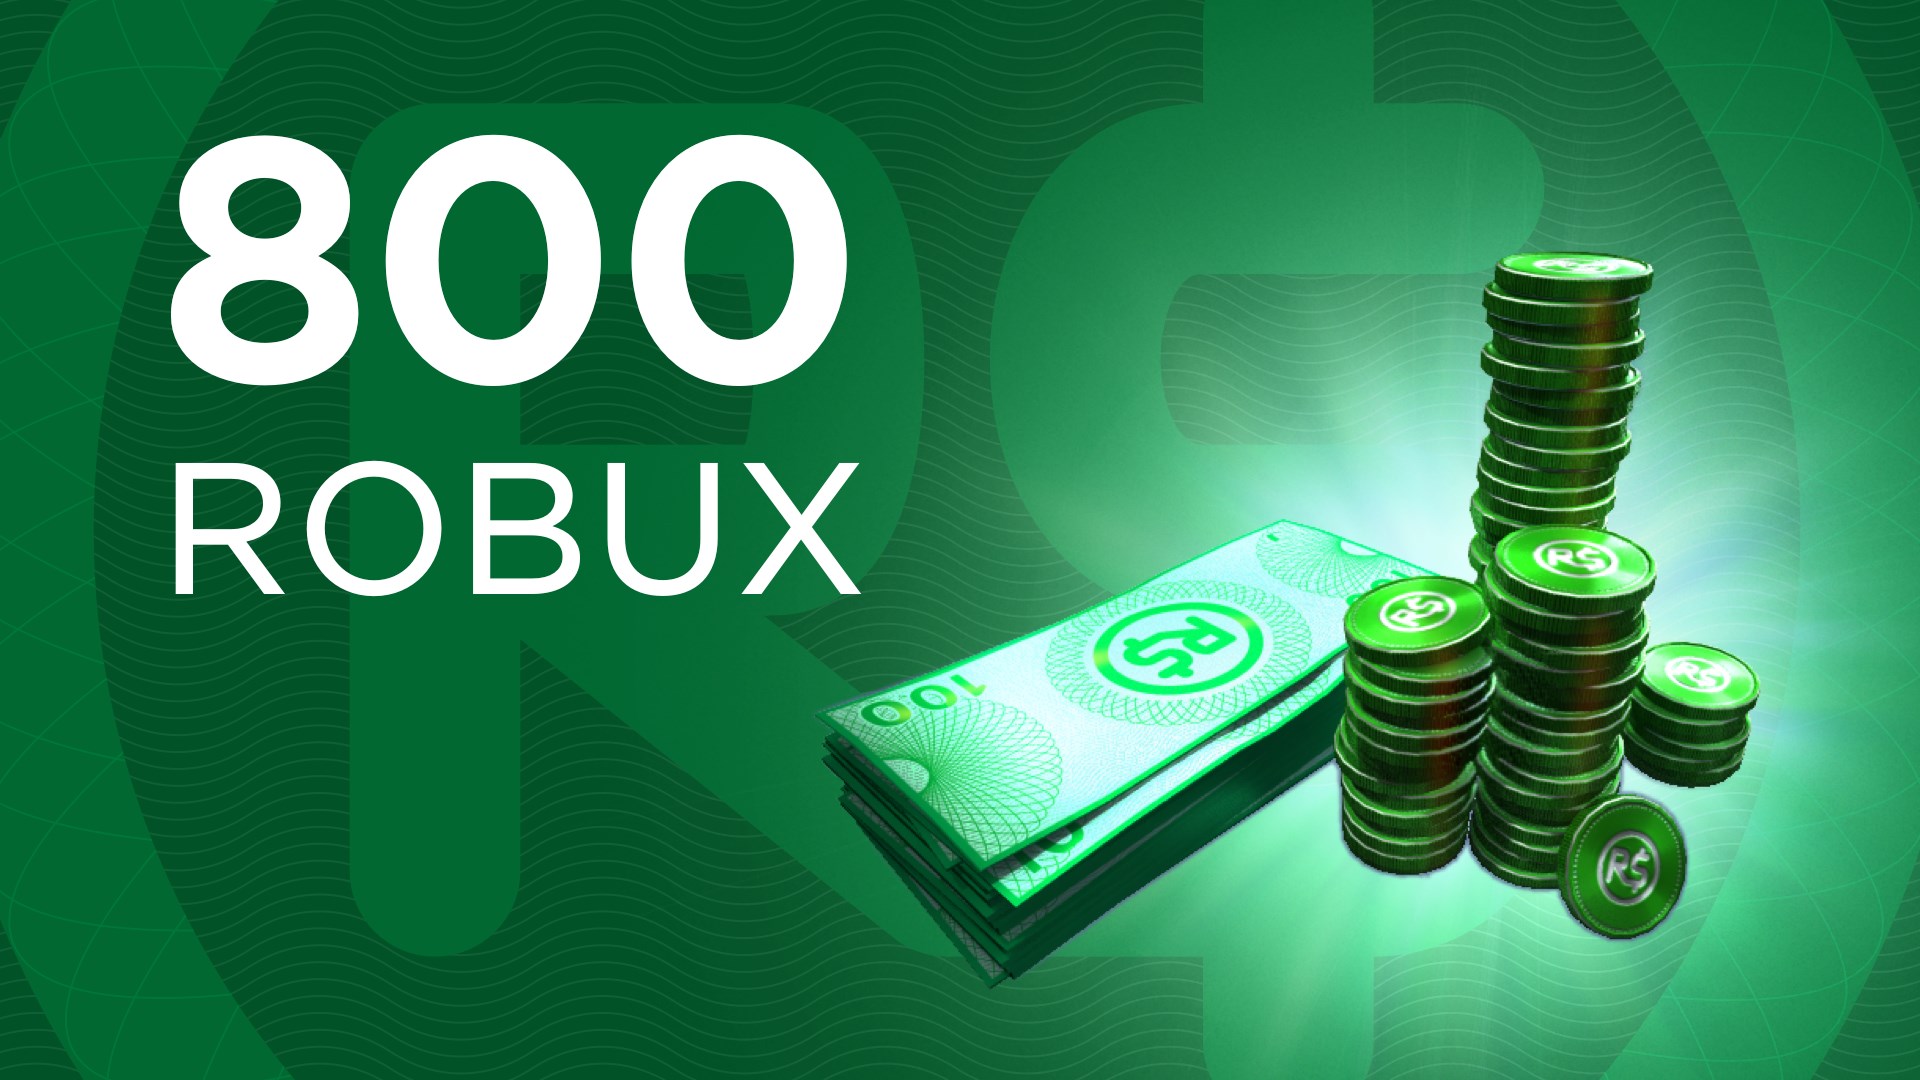 Buy 800 Robux For Xbox Microsoft Store - roblox robux awards get robux debit card